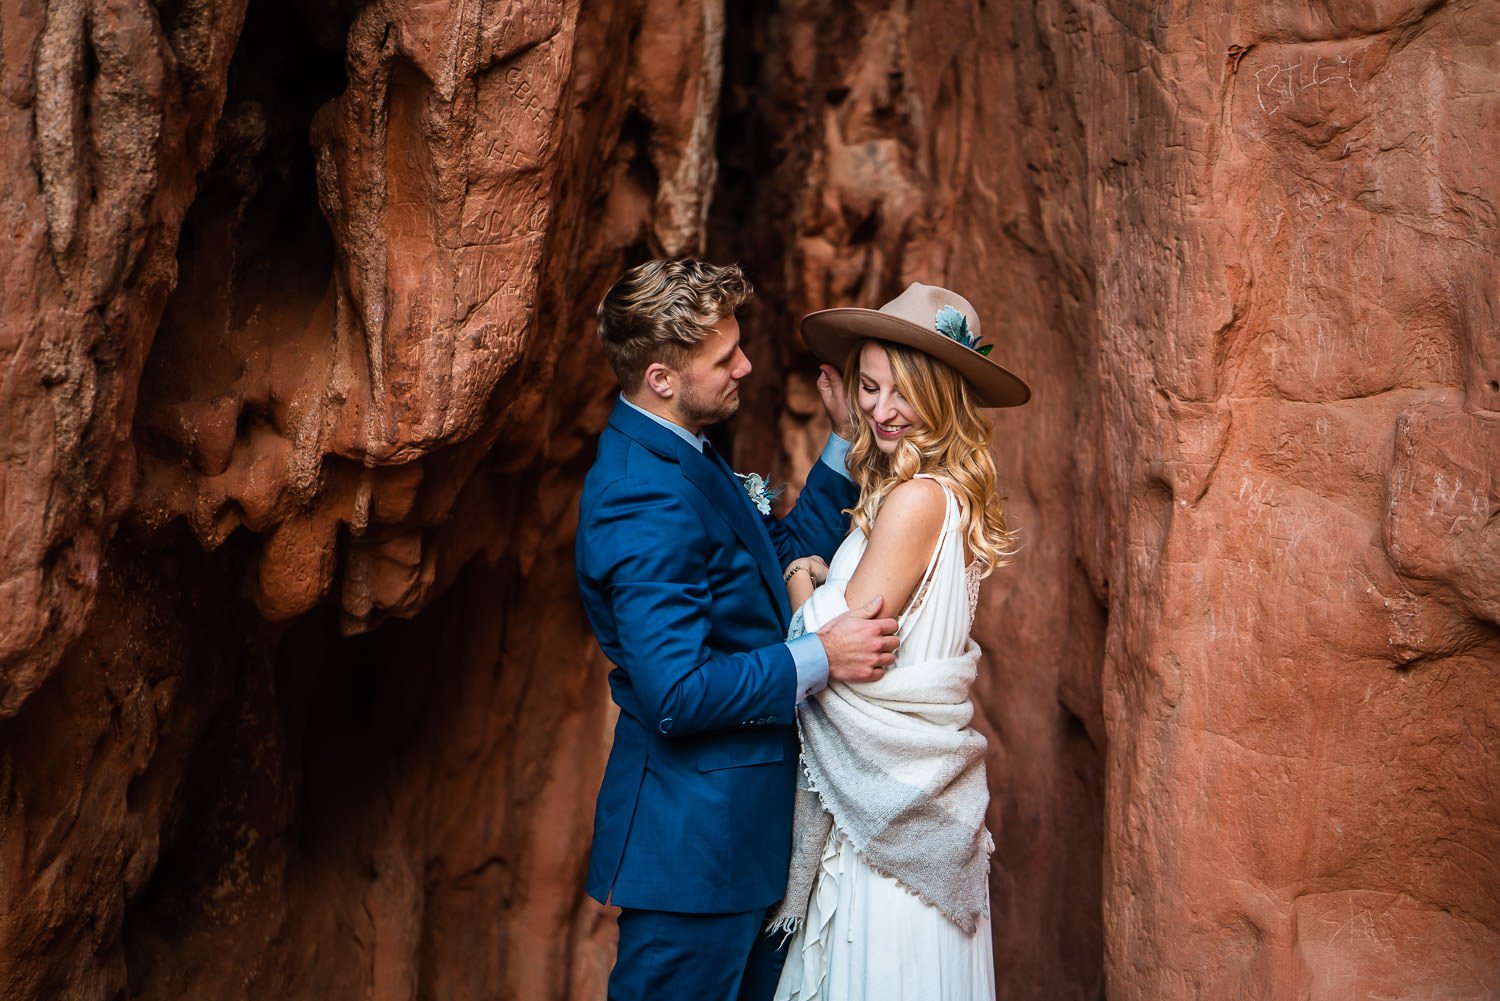 A couple exchanging vows in a breathtaking red rock canyon, captured in stunning elopement photos.